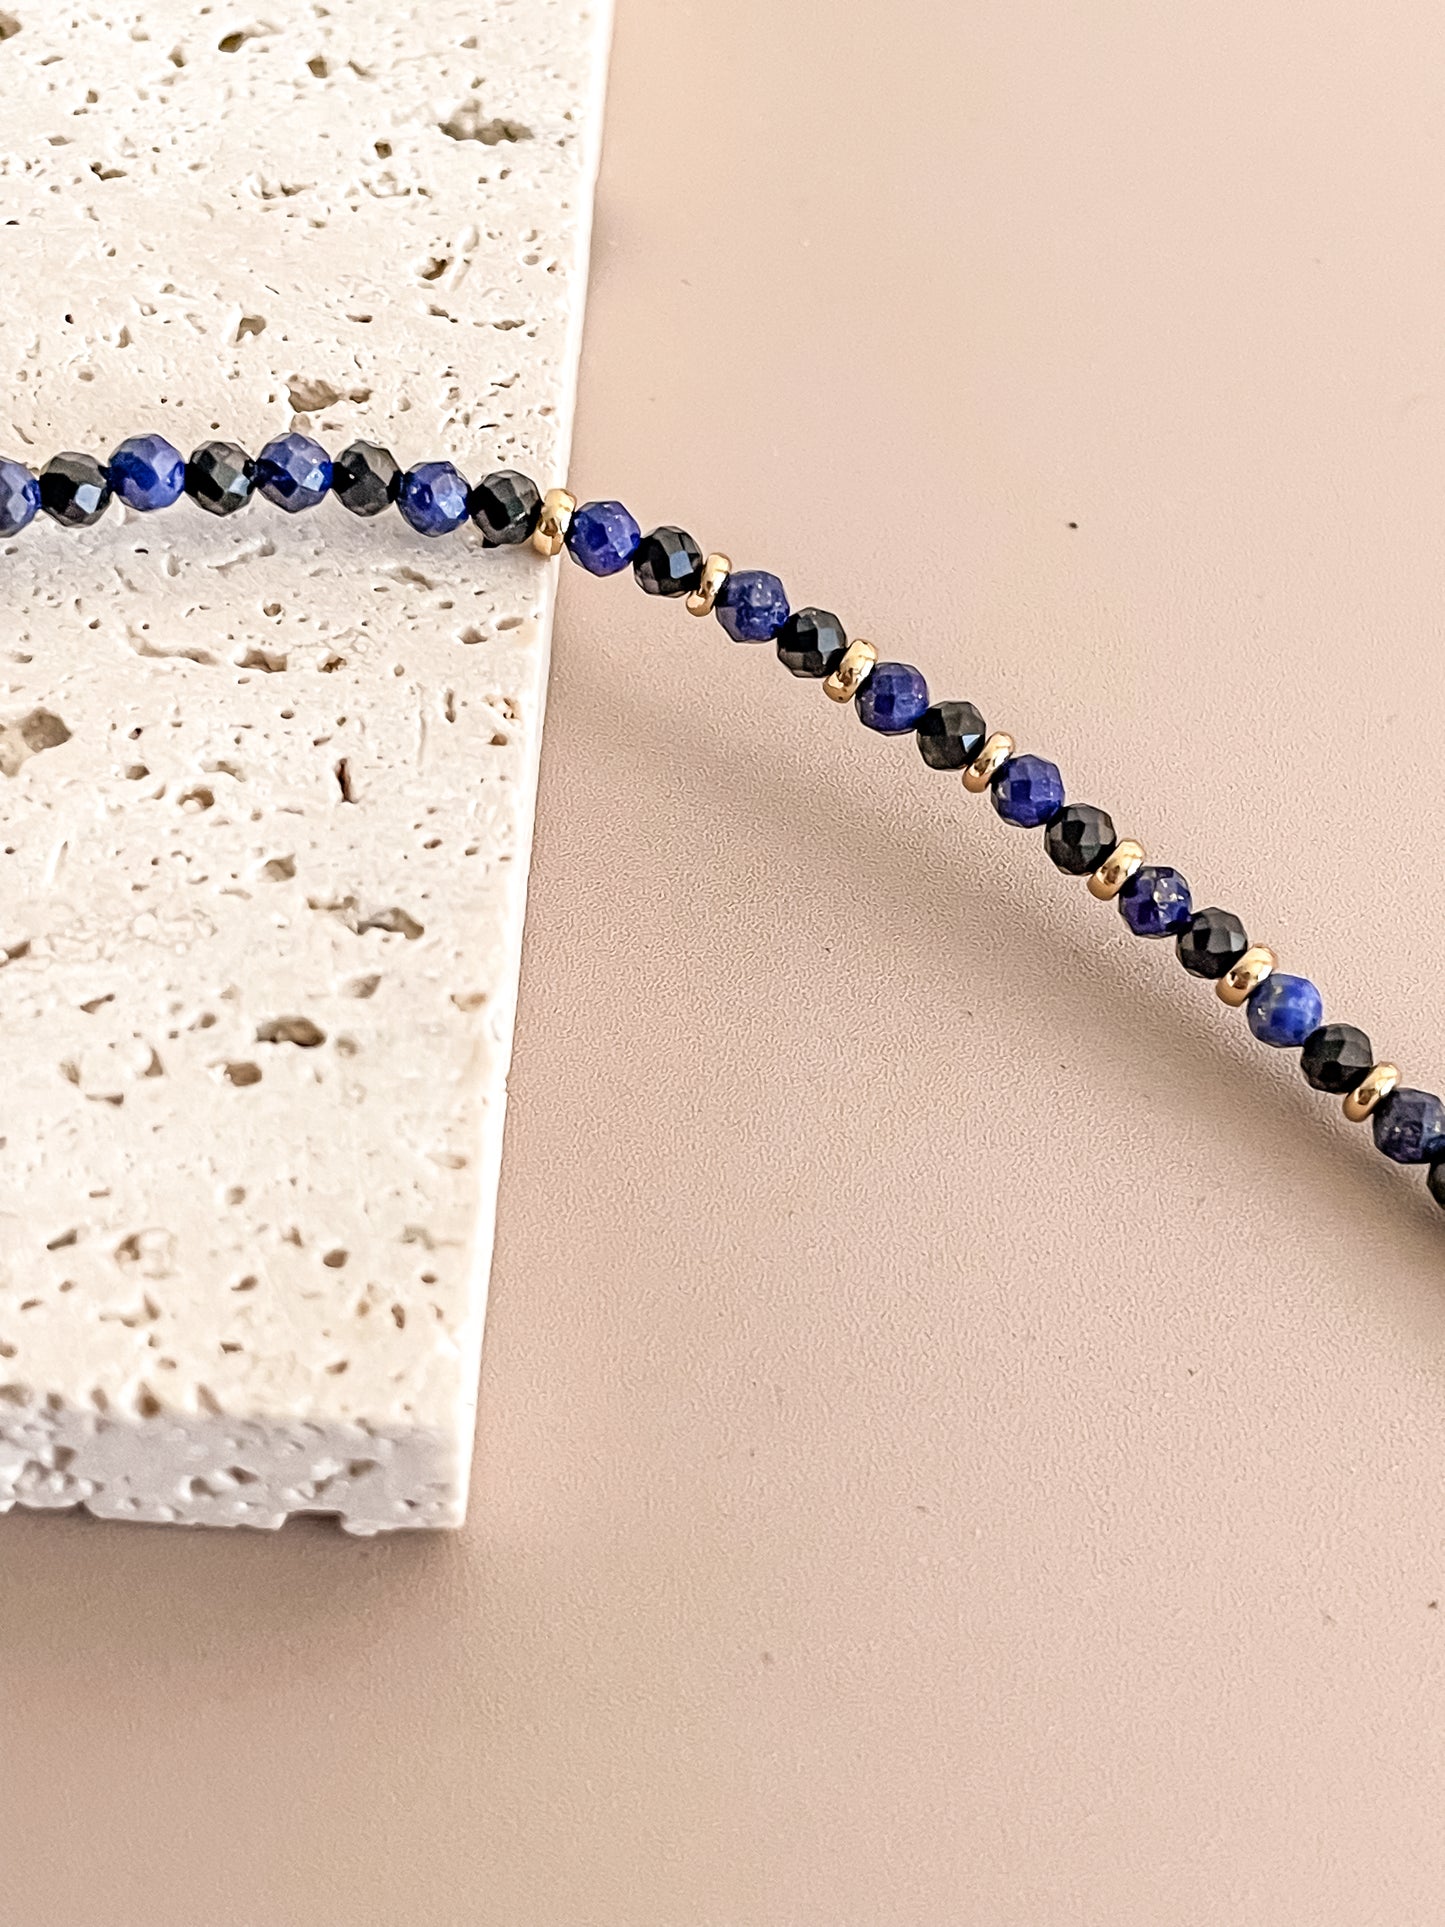 Lapis Lazuli And Black Spinel Beaded Necklace